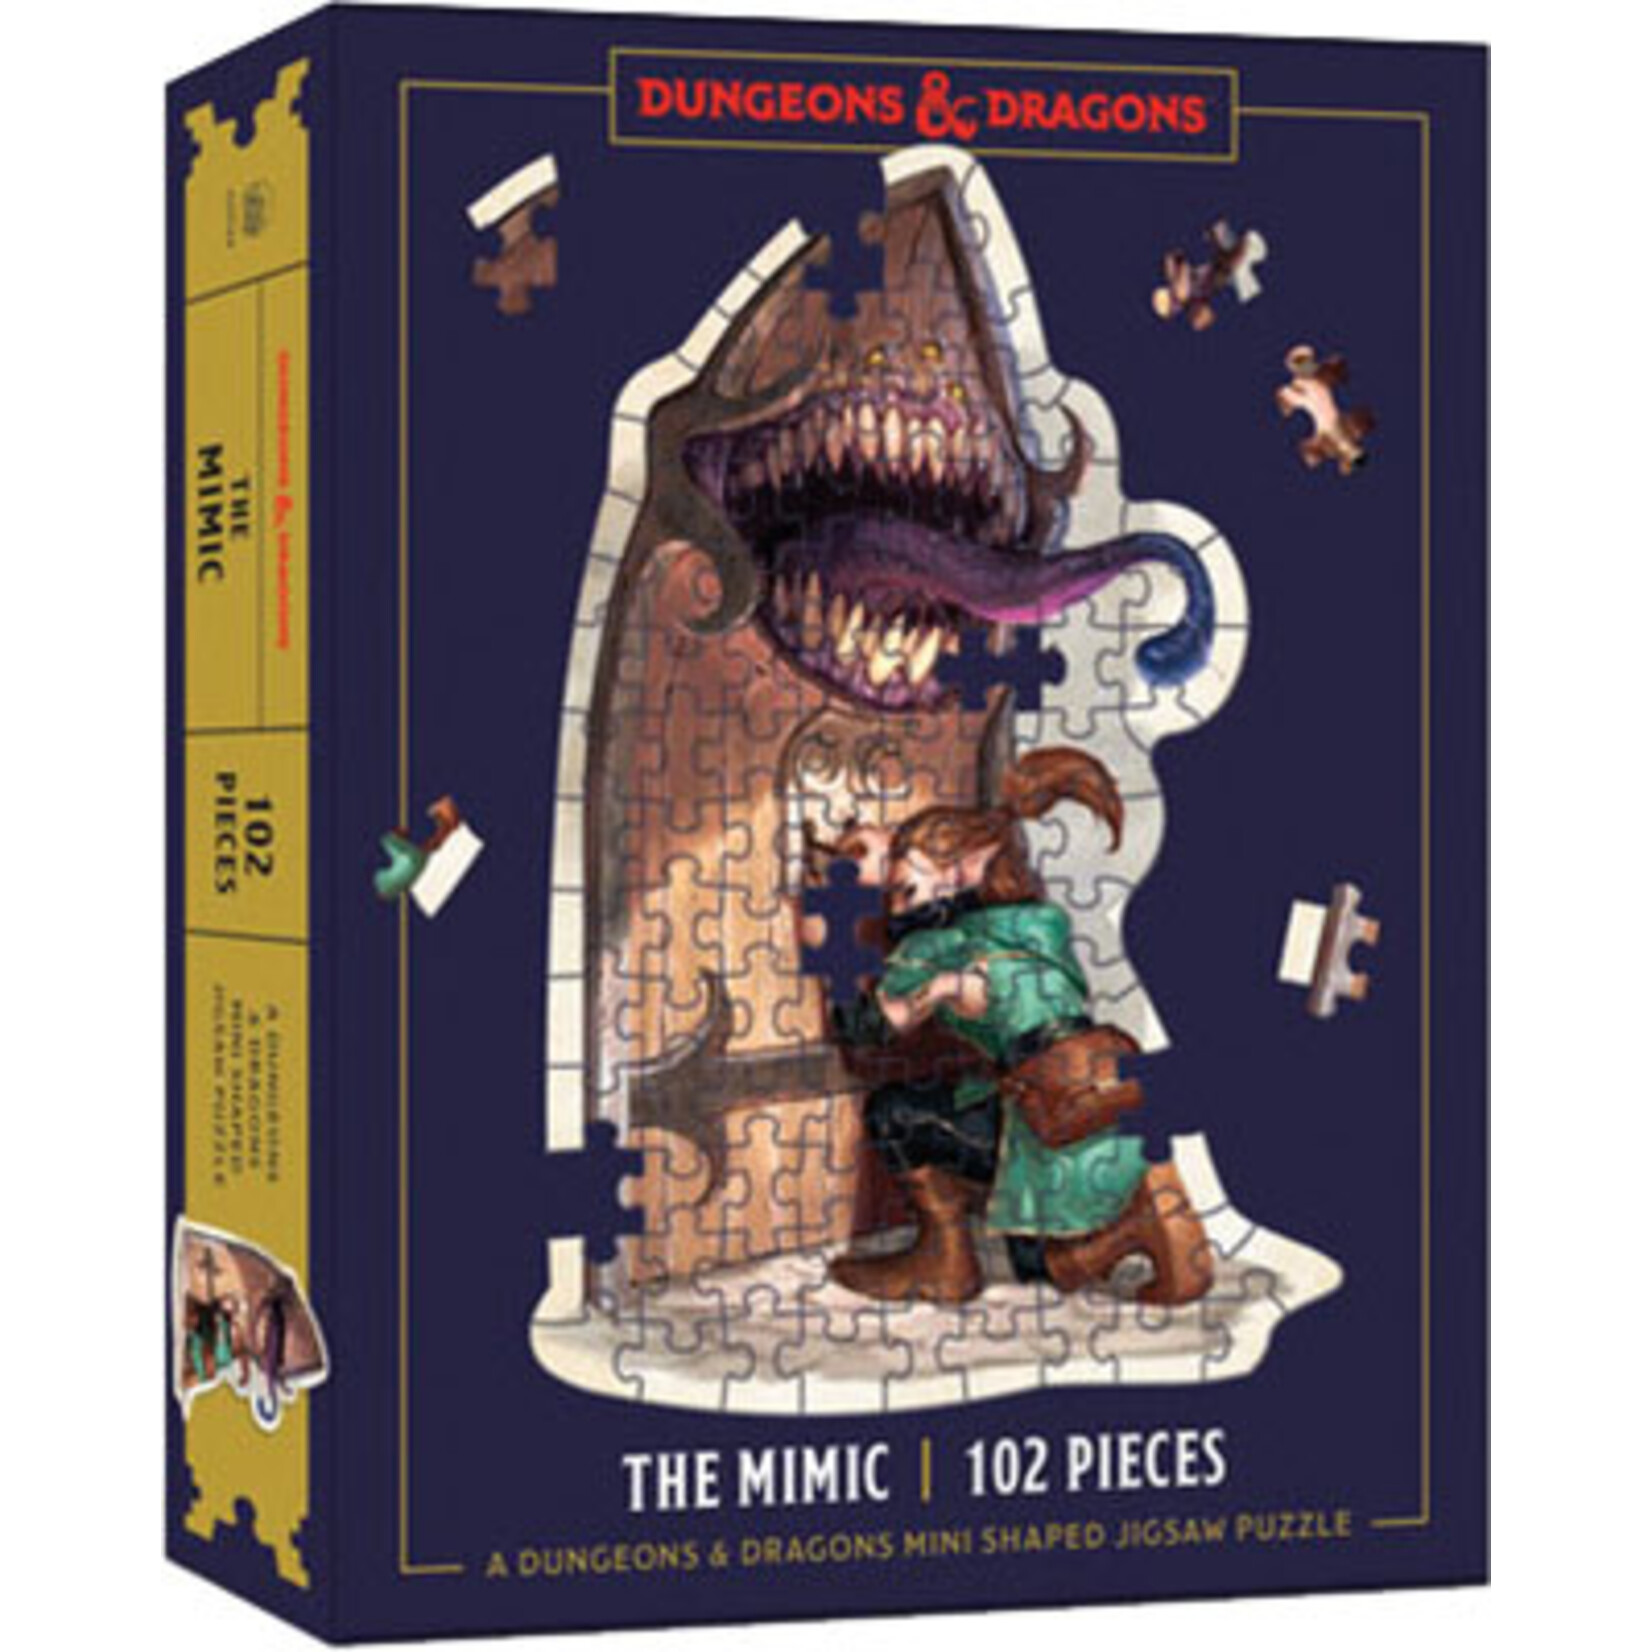 RANDOM HOUSE Dungeons & Dragons Mini Shaped Jigsaw Puzzle: The Mimic Edition